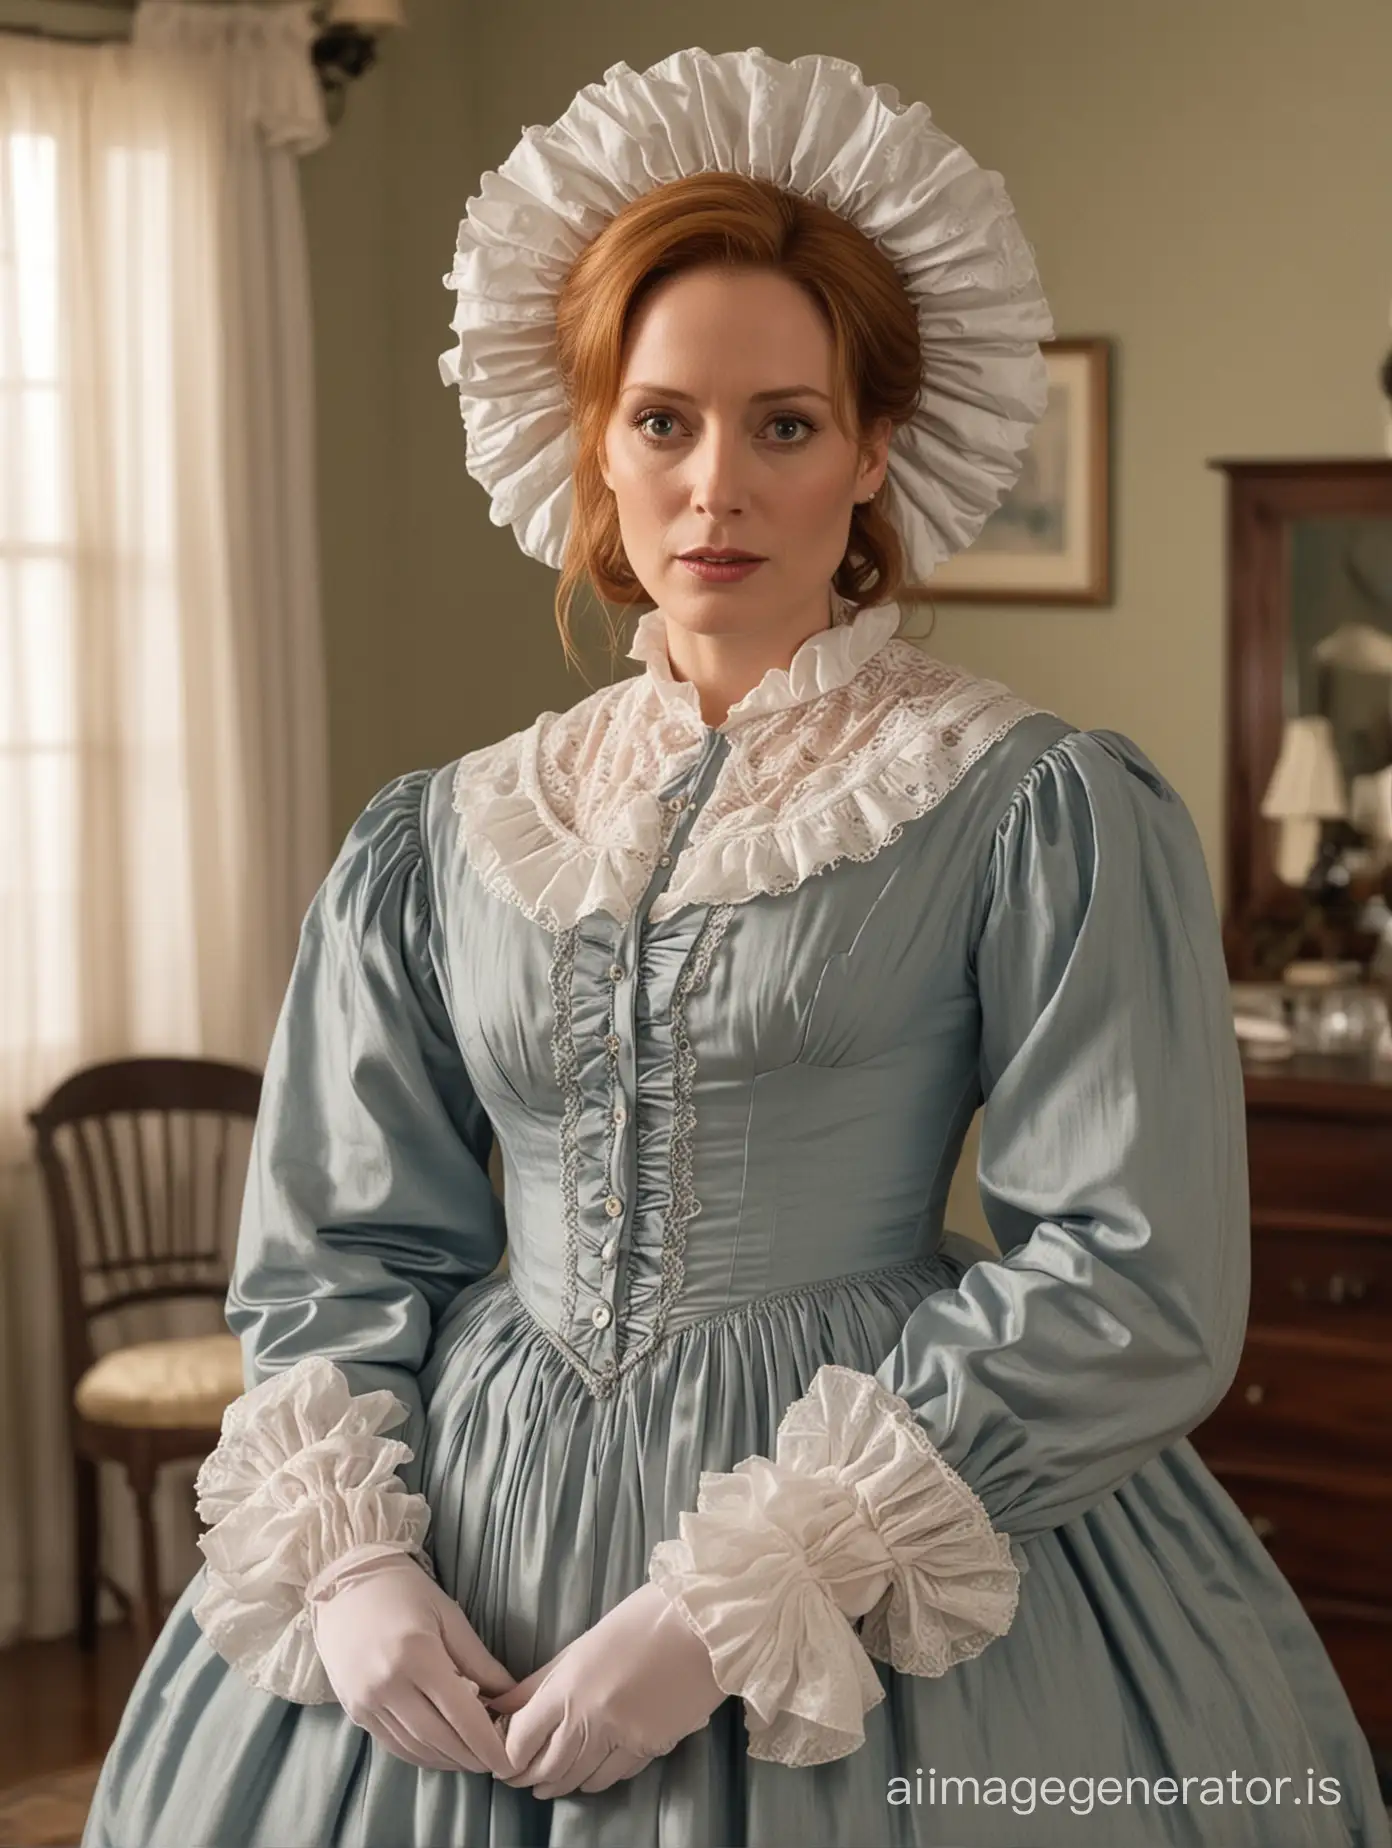 Dana Scully , dressed in a floor-length 1860 Victorian billowing dress her hair styled into a bun adorned with a white little frilly bonnet